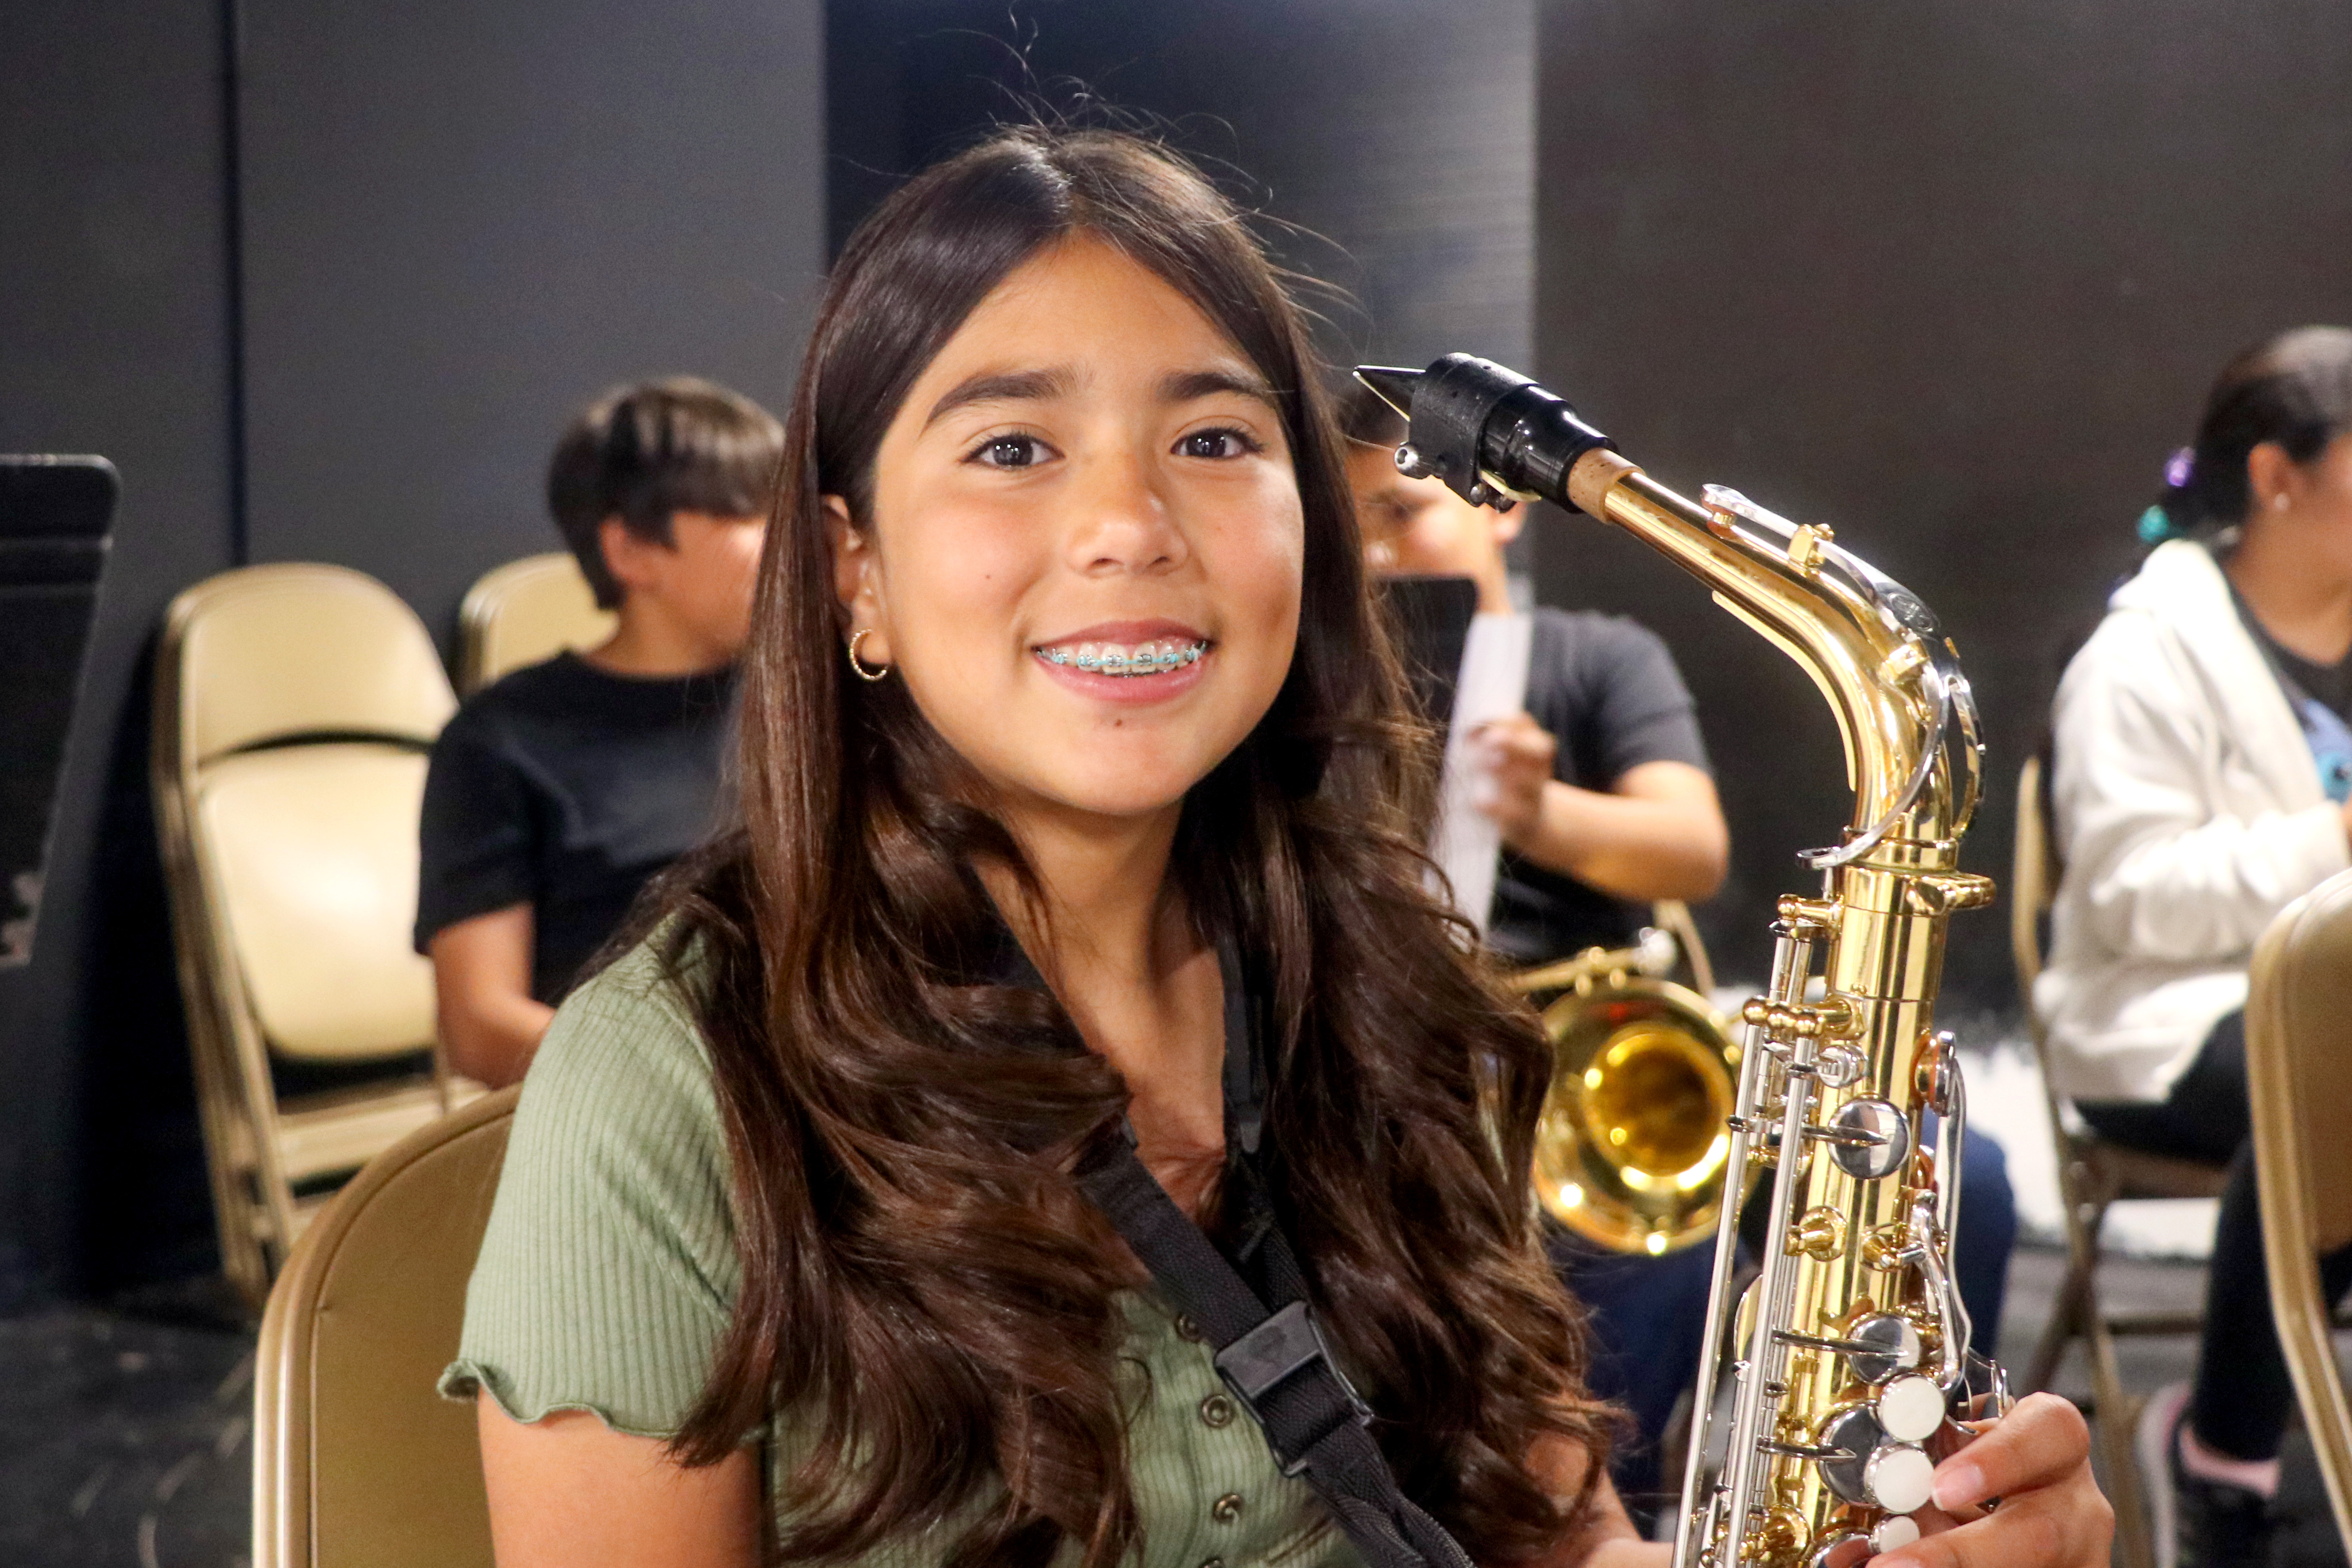 Girl smiles while holding her saxophone.